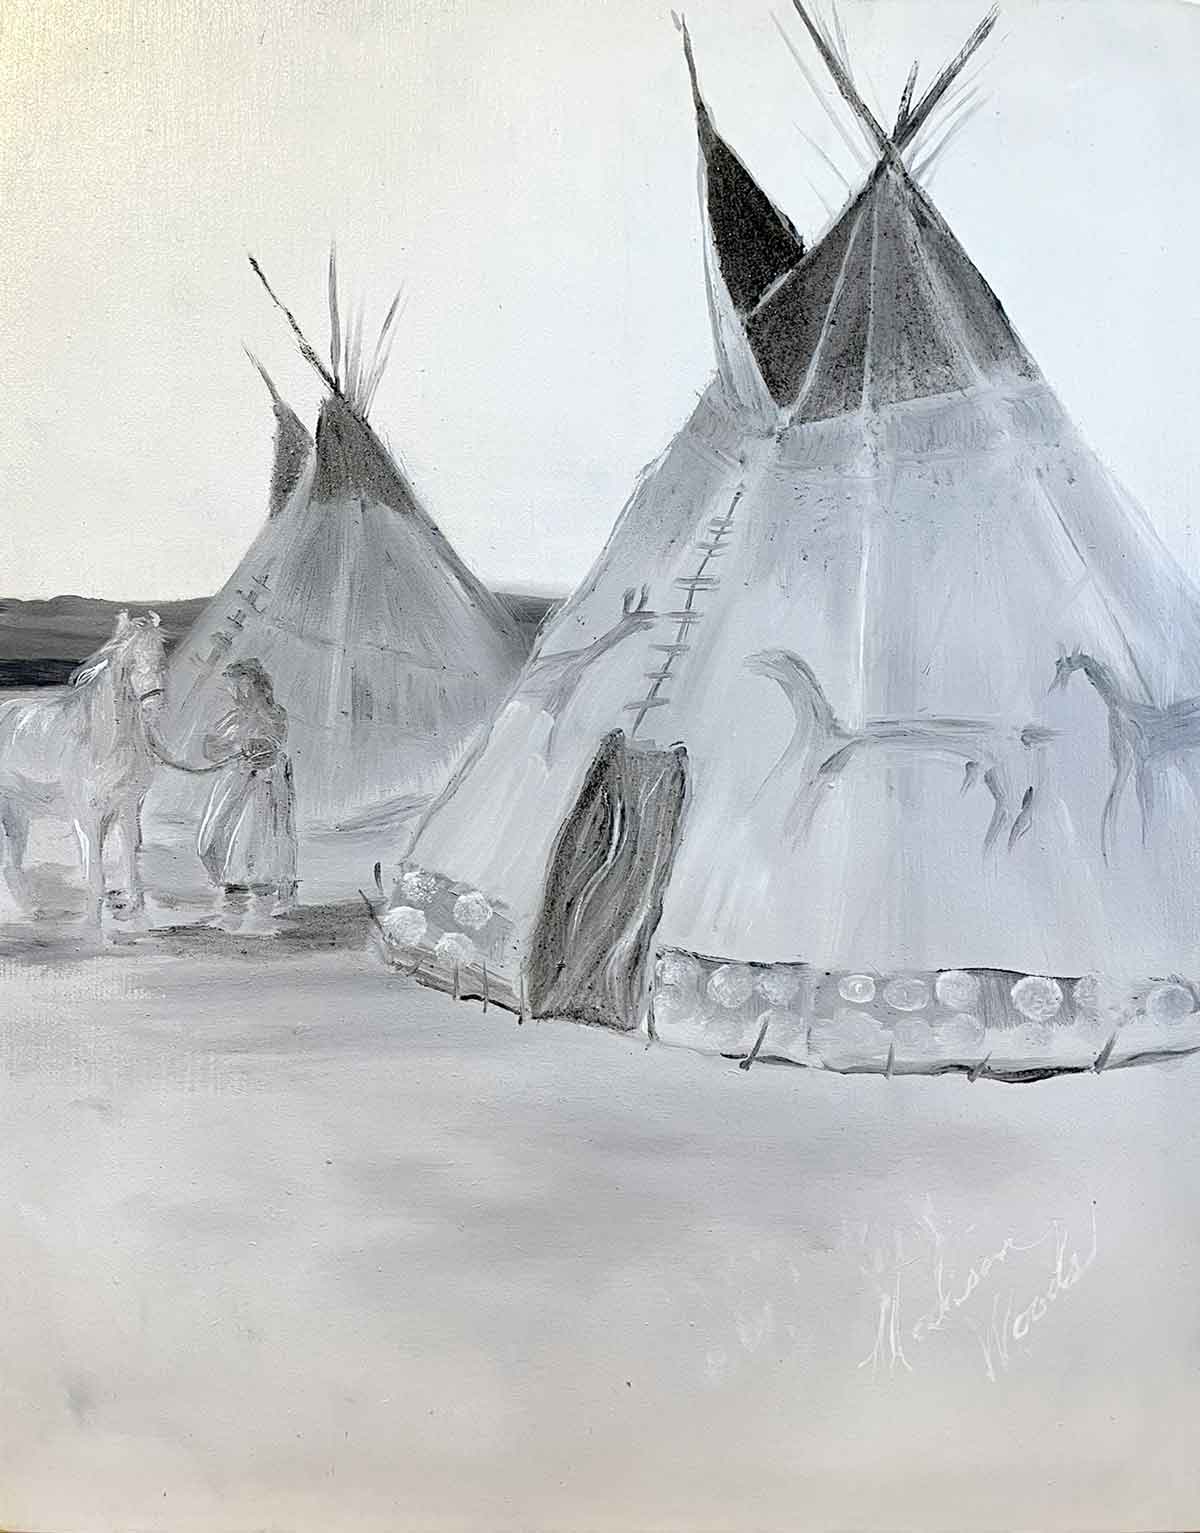 The finished tipi painting for Karter's birthday. Based on an Edward Curtis photo titled 'Blackfoot Tipis'.